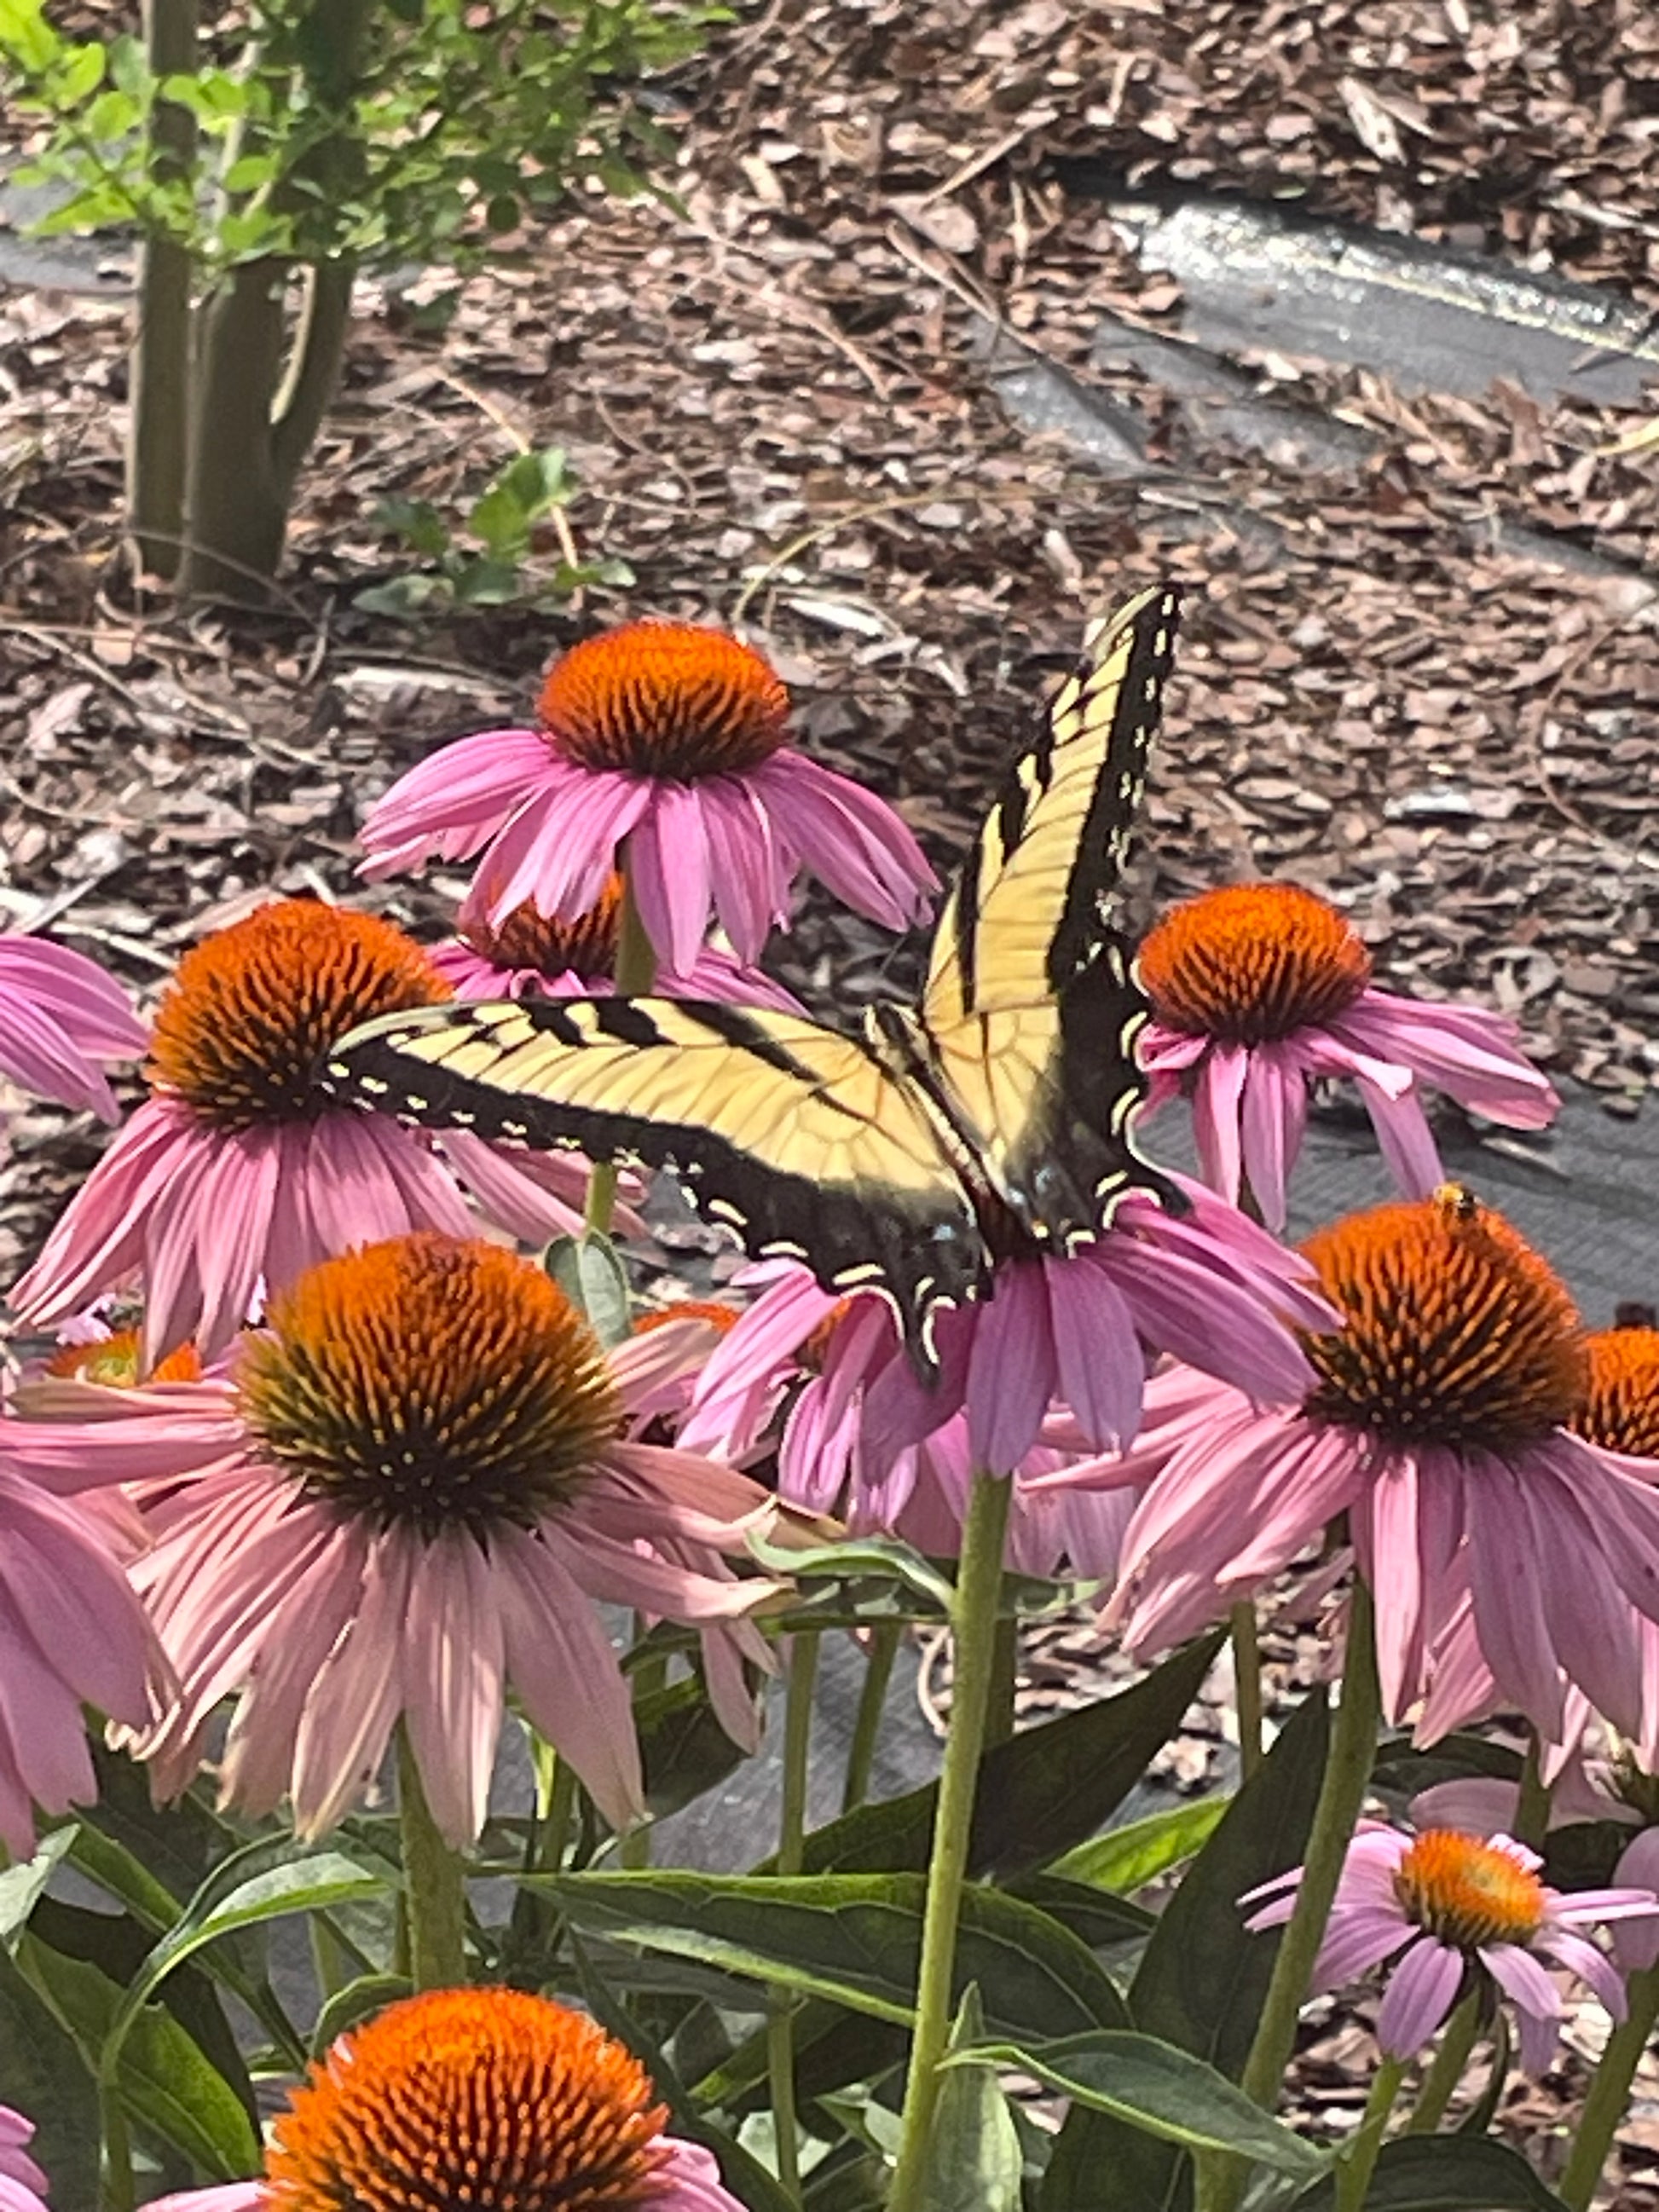 tiger swallowtail on coneflower nectar